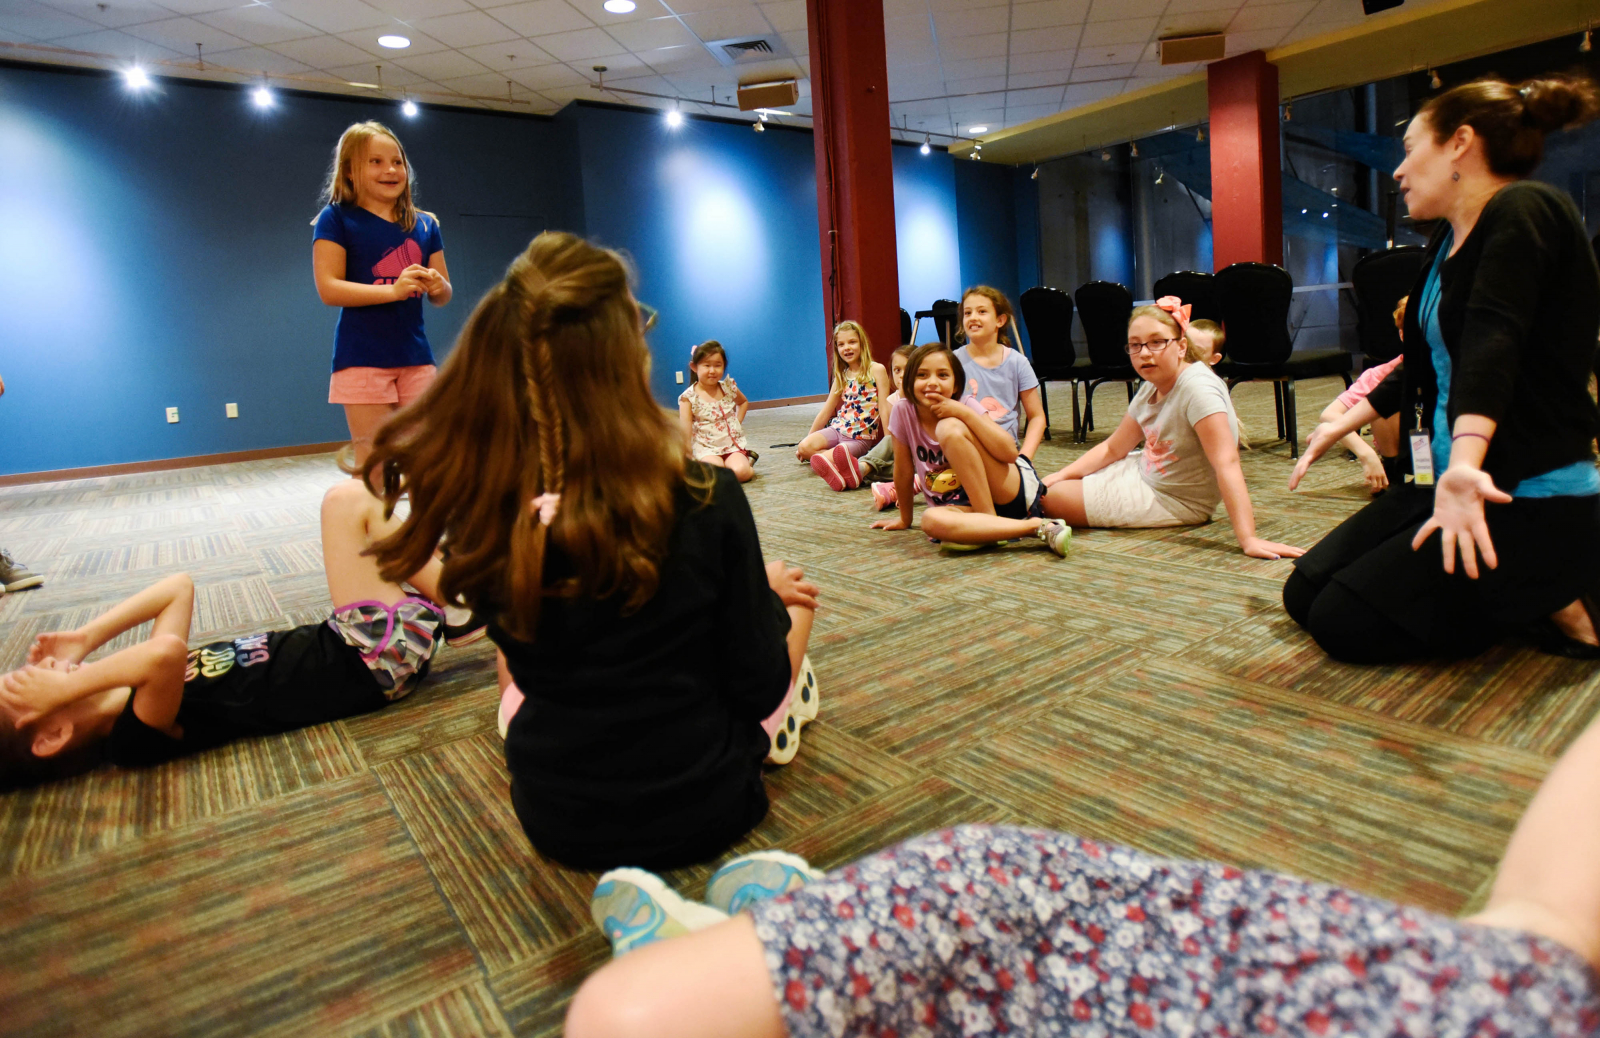 Kids create scenes for "The Three Little Pigs" during Acting Out, part of the School of the Performing Arts Summer Program at Proctors Tuesday, July 11, 2017.